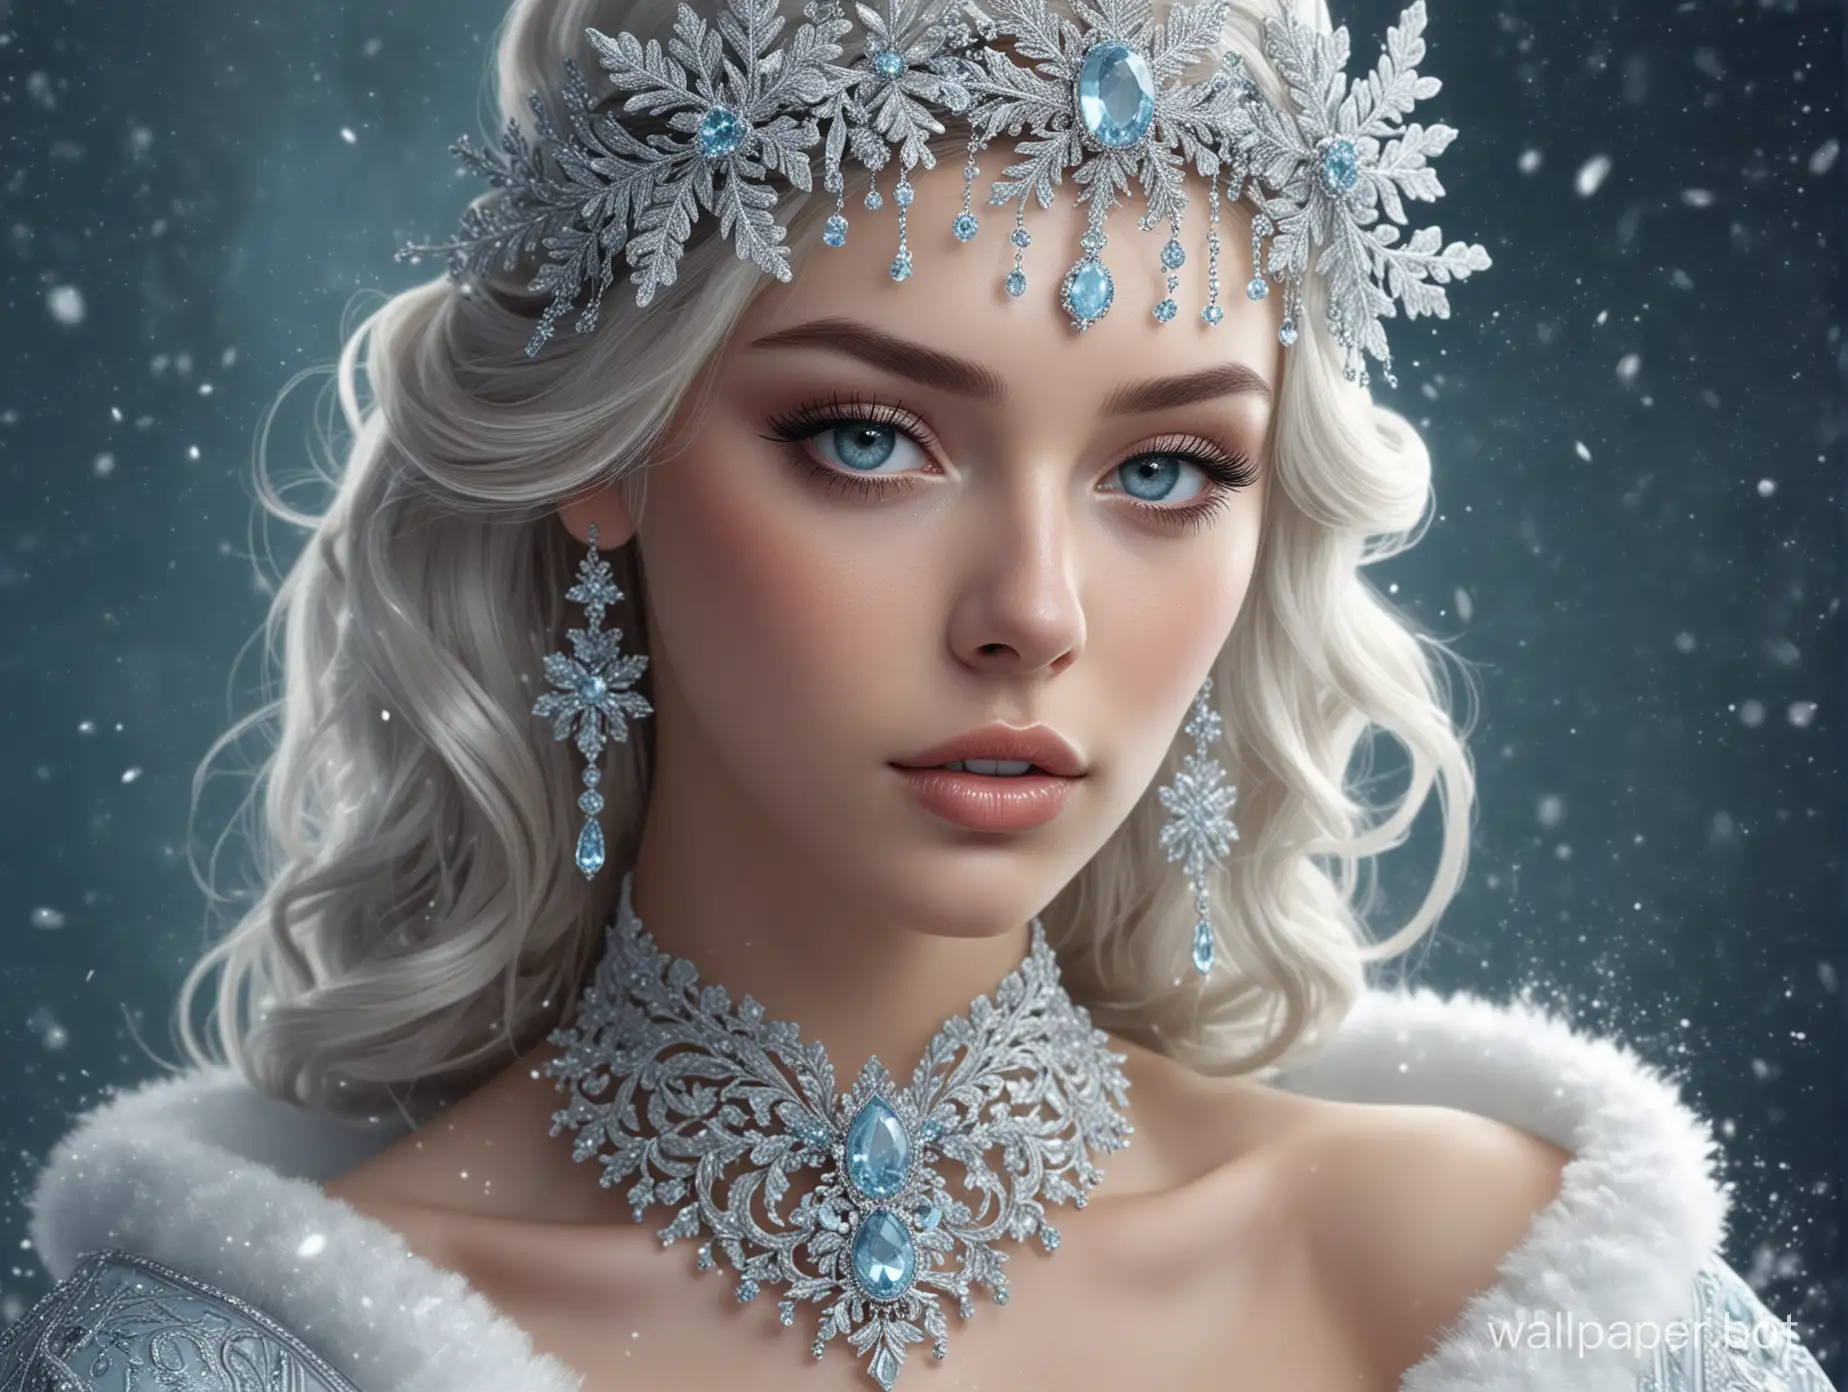 A digital illustration of a woman with an ethereal beauty, wearing a regal, snow-themed headpiece adorned with intricate silver embroidery and a large aquamarine centerpiece. Snowflakes gently fall around her. Her hair is light blonde, styled in loose waves. She has striking blue eyes, full lashes, and her makeup includes silver eyeshadow and nude gloss lipstick. Dangling earrings with sapphire and pearl details complement her look. The illustration is hyper-realistic with a focus on soft lighting and a cool color palette of blues, whites, and silvers, emphasizing a wintery theme. The background is a blurred cool blue, suggesting a snowy atmosphere., portrait photography, painting, vibrant, conceptual art, 3d render, illustration